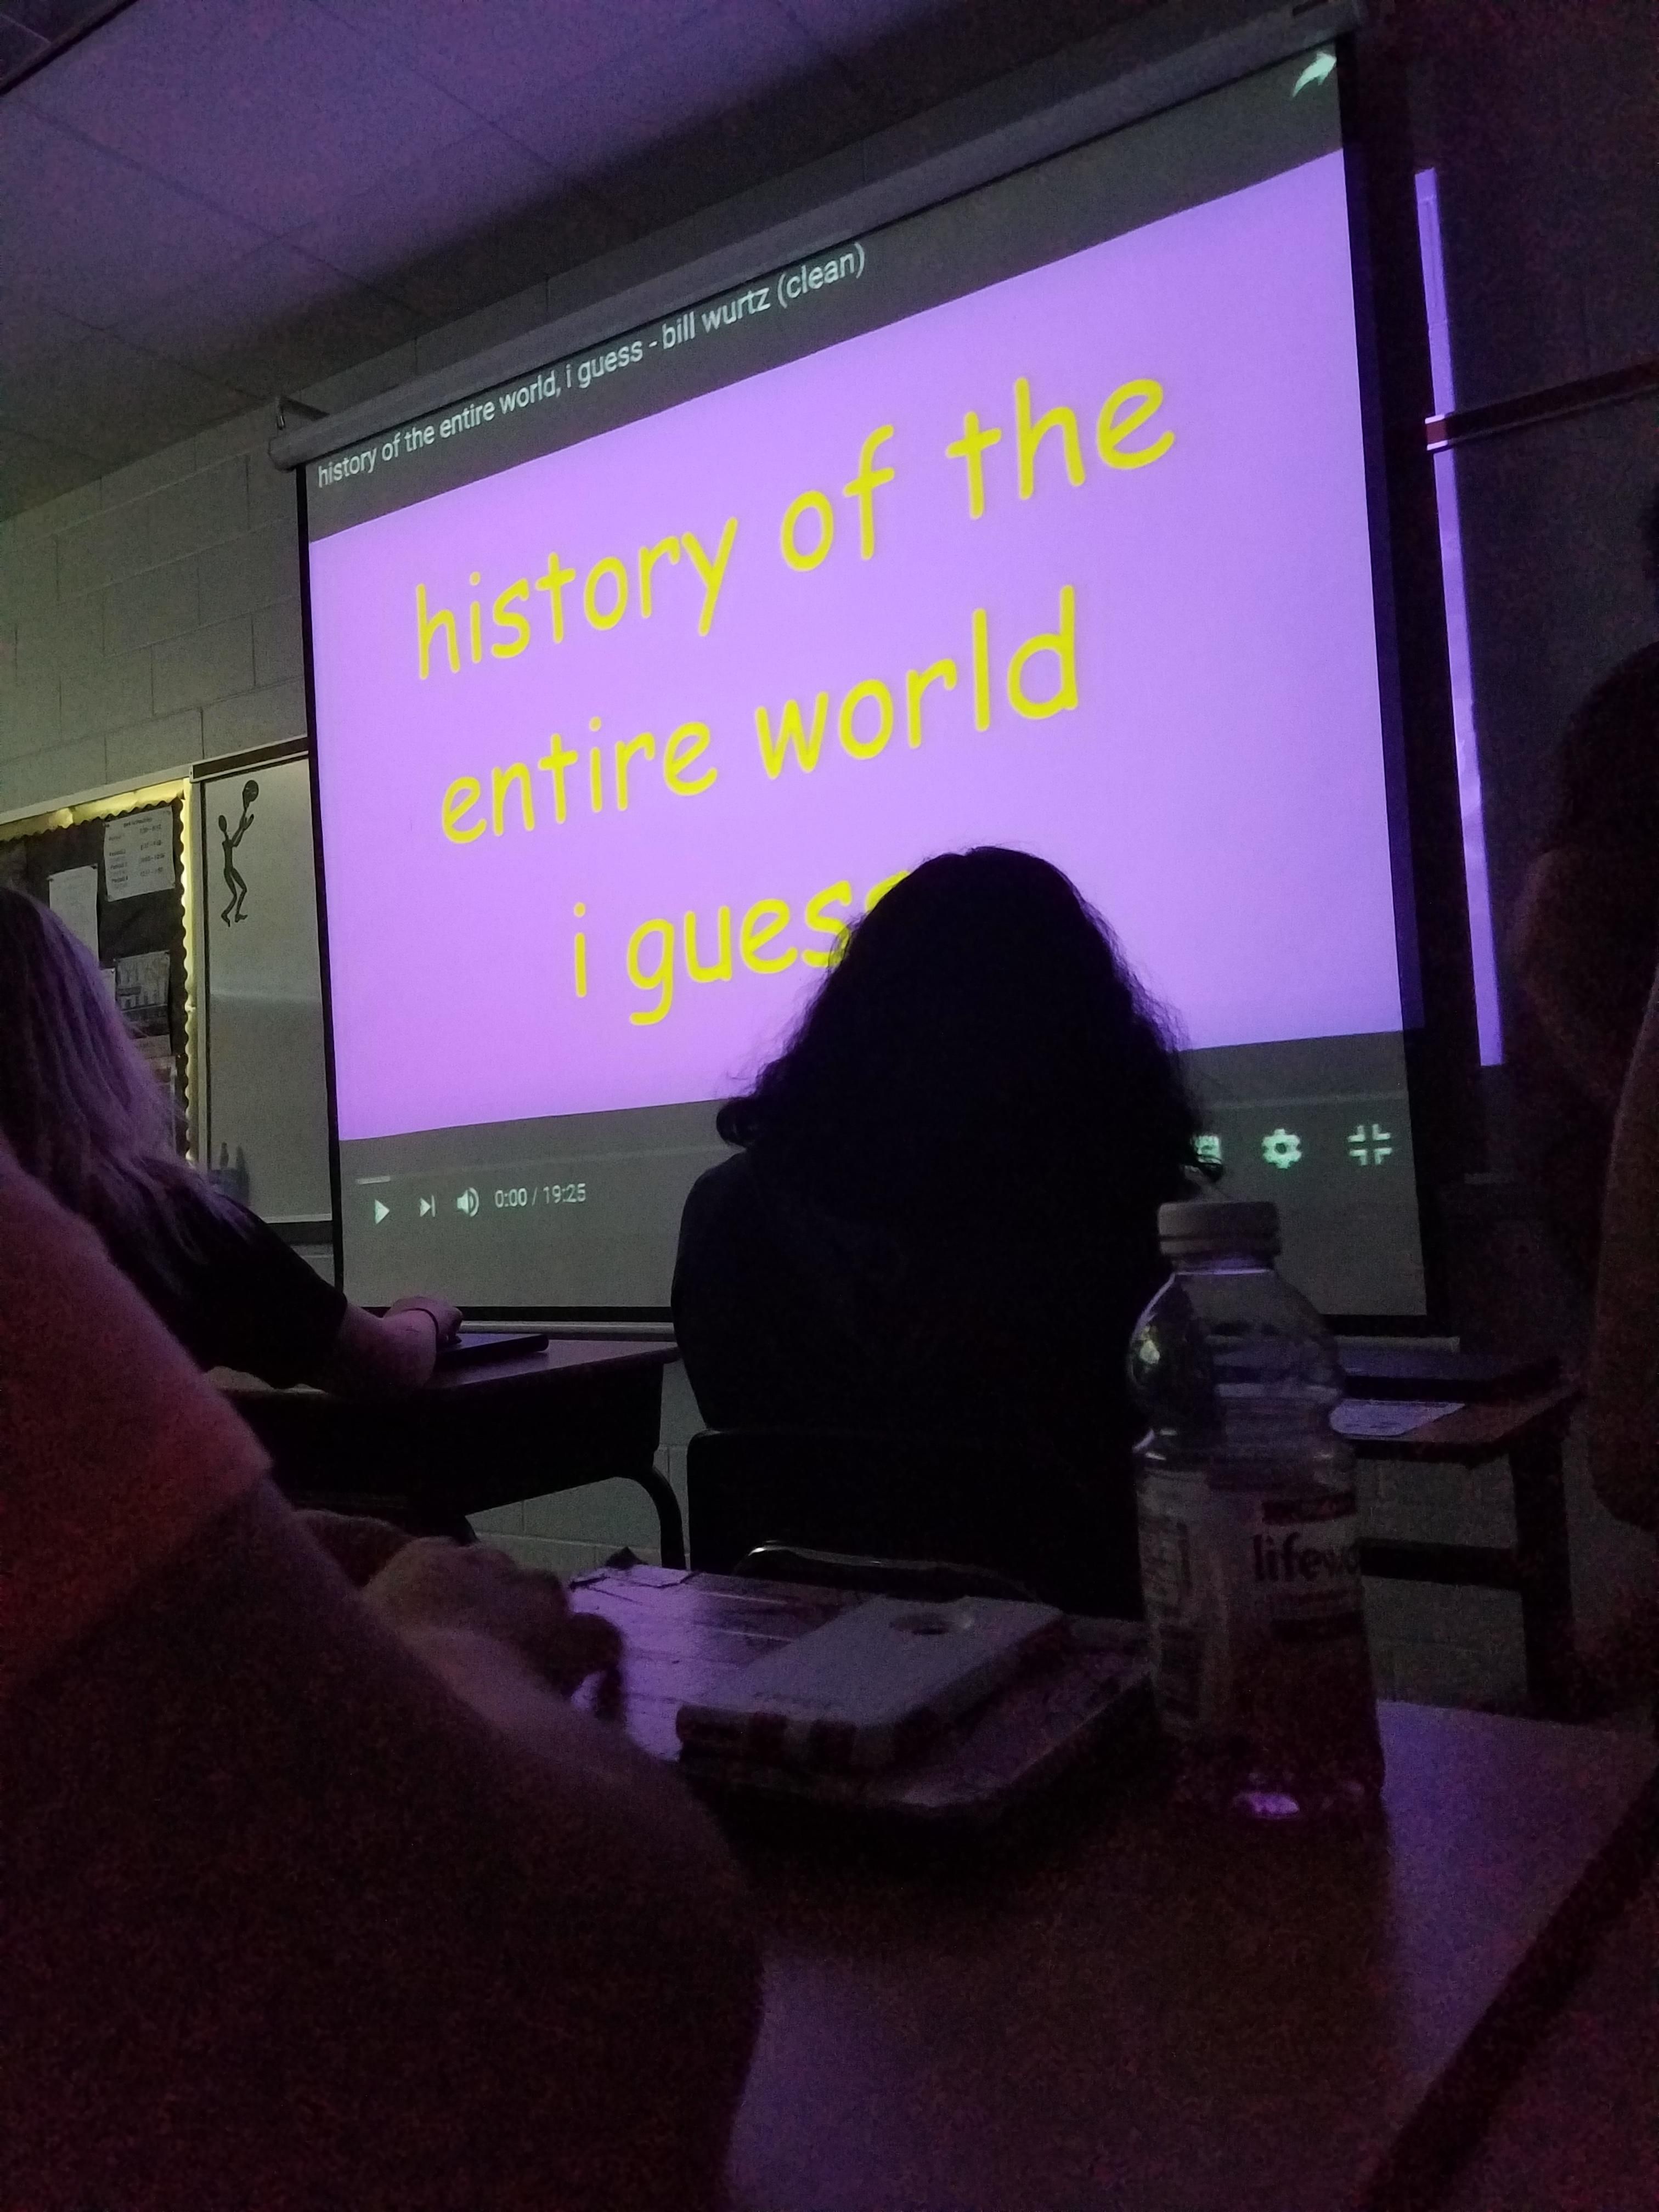 What we watched today in history class.